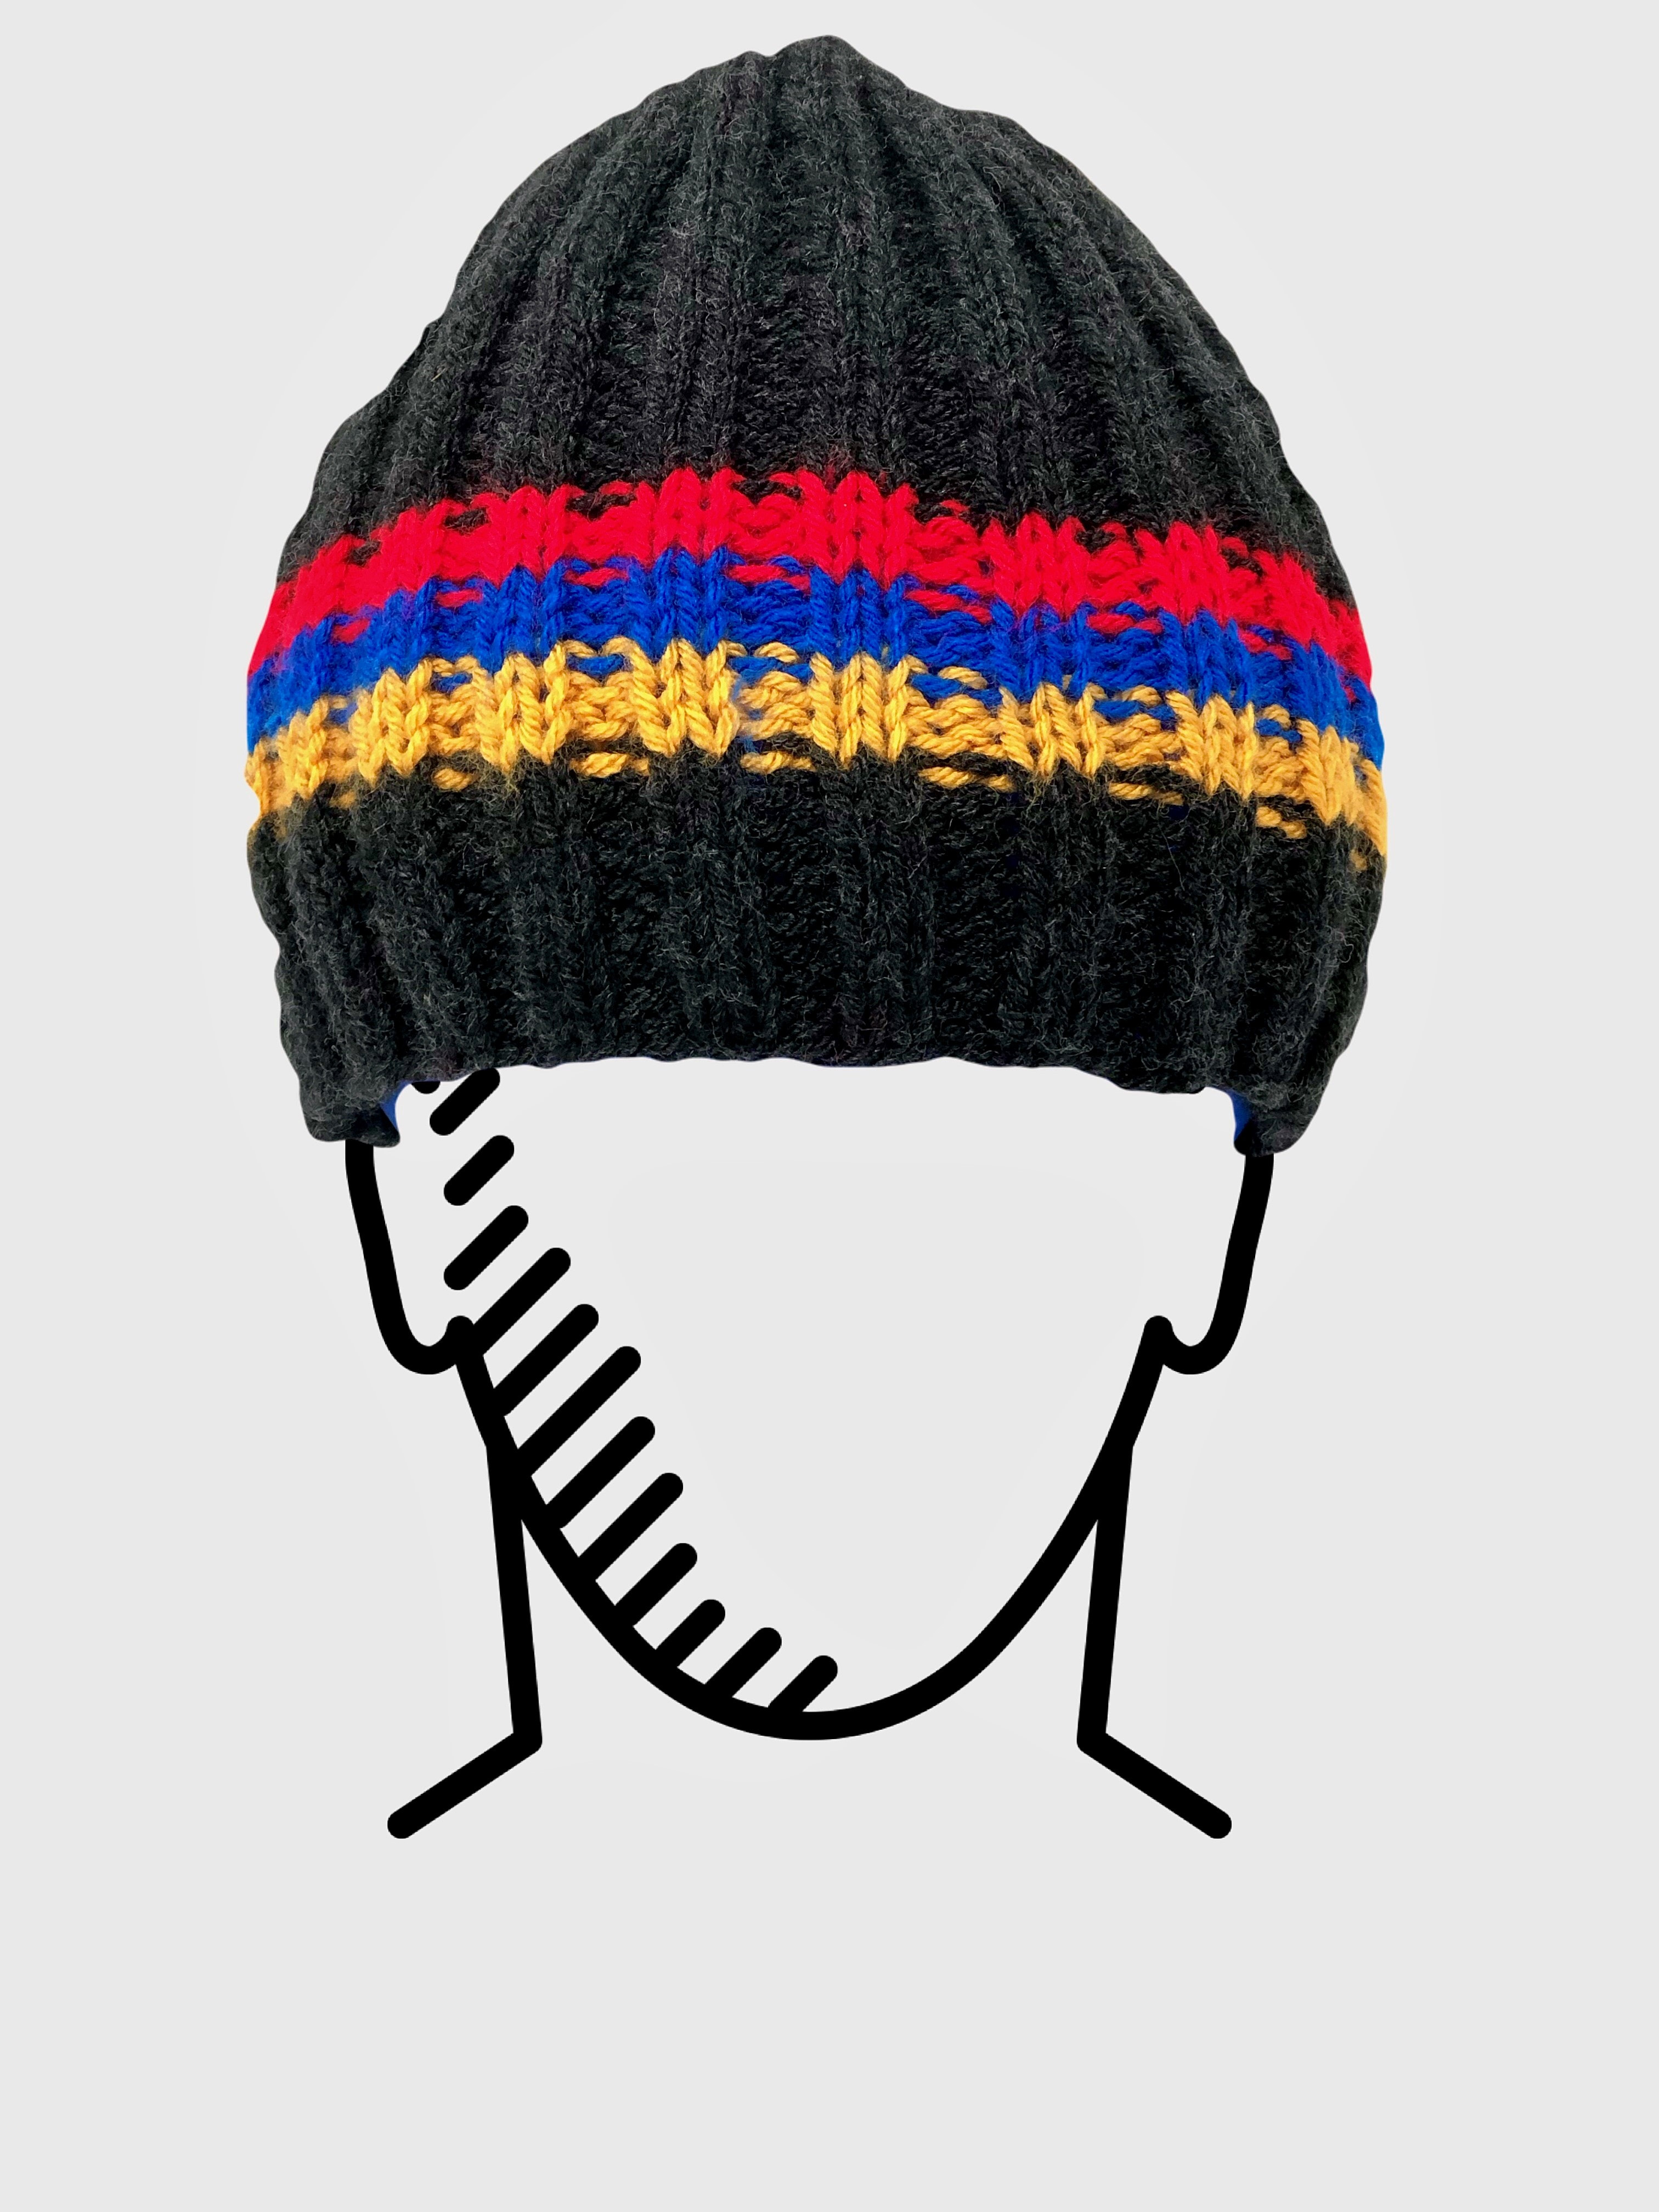 Winter tuque in tricolor knitwear to customize